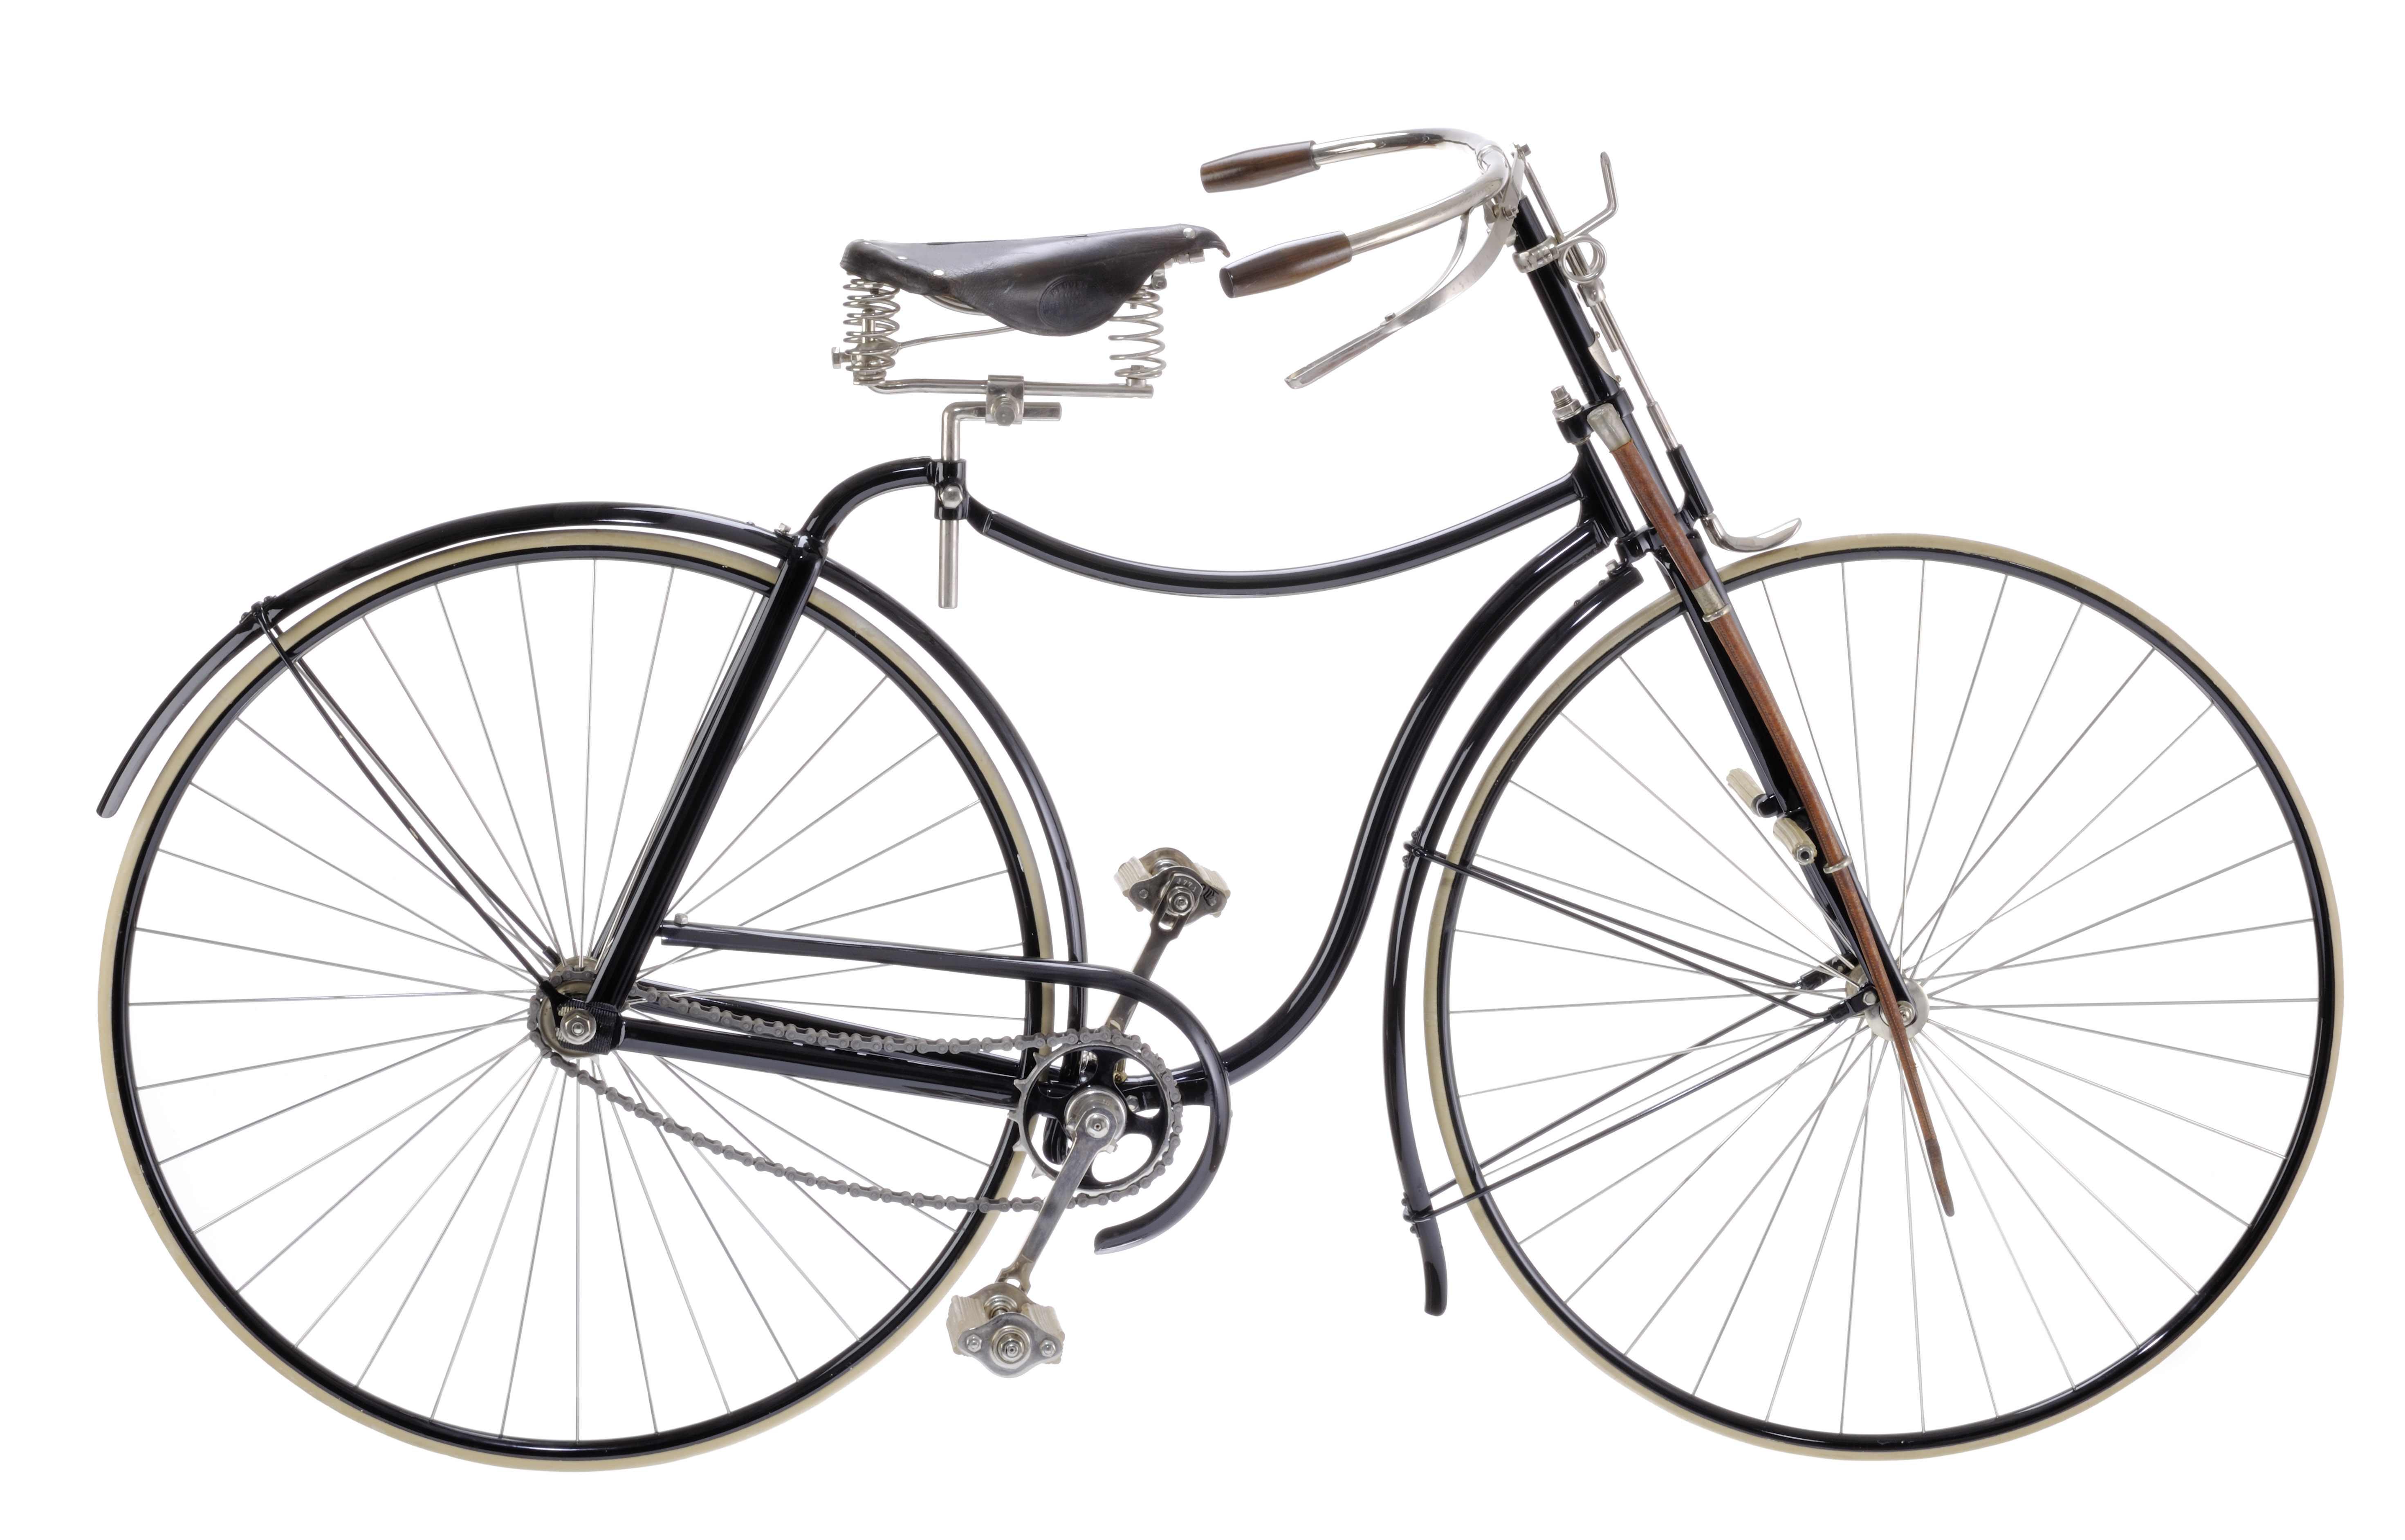 200th anniversary: How the bicycle changed society